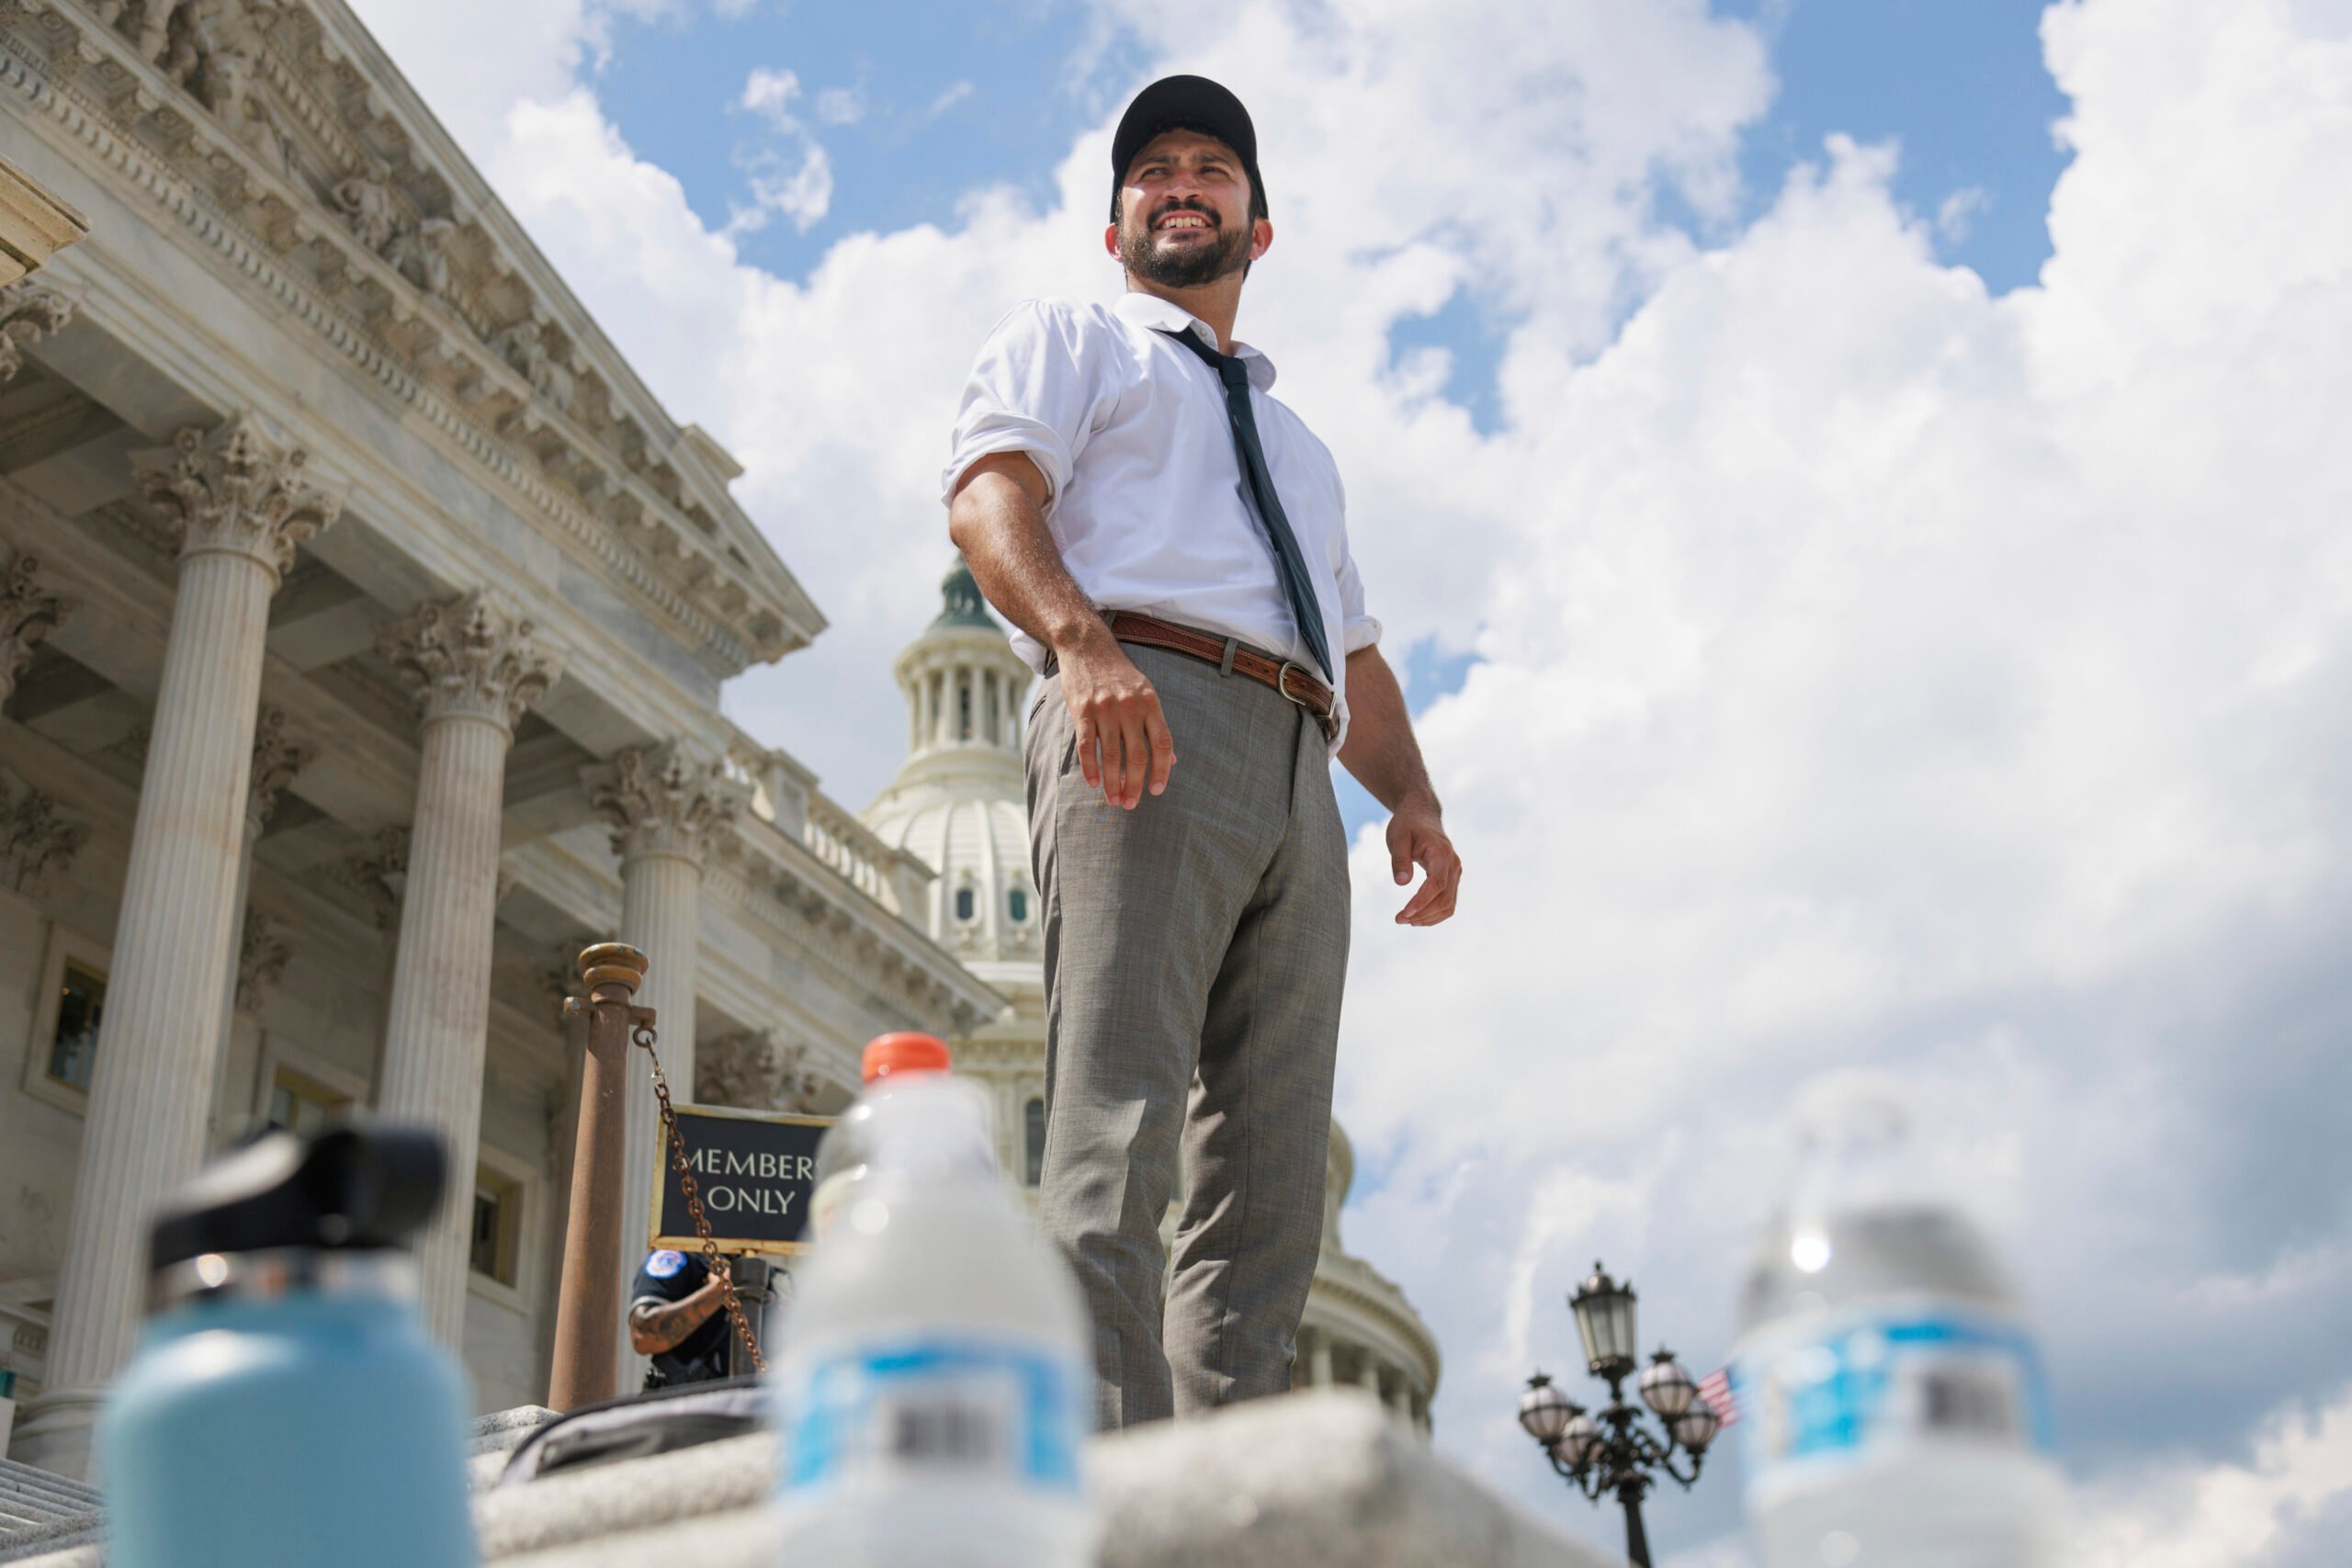 U.S. Representative Greg Casar (D-TX), a Latino man, is seen beyond water bottles on the steps of the U.S. Capitol in Washington, D.C. He's wearing formal pants, a shirt and tie, with his sleeves rolled up.